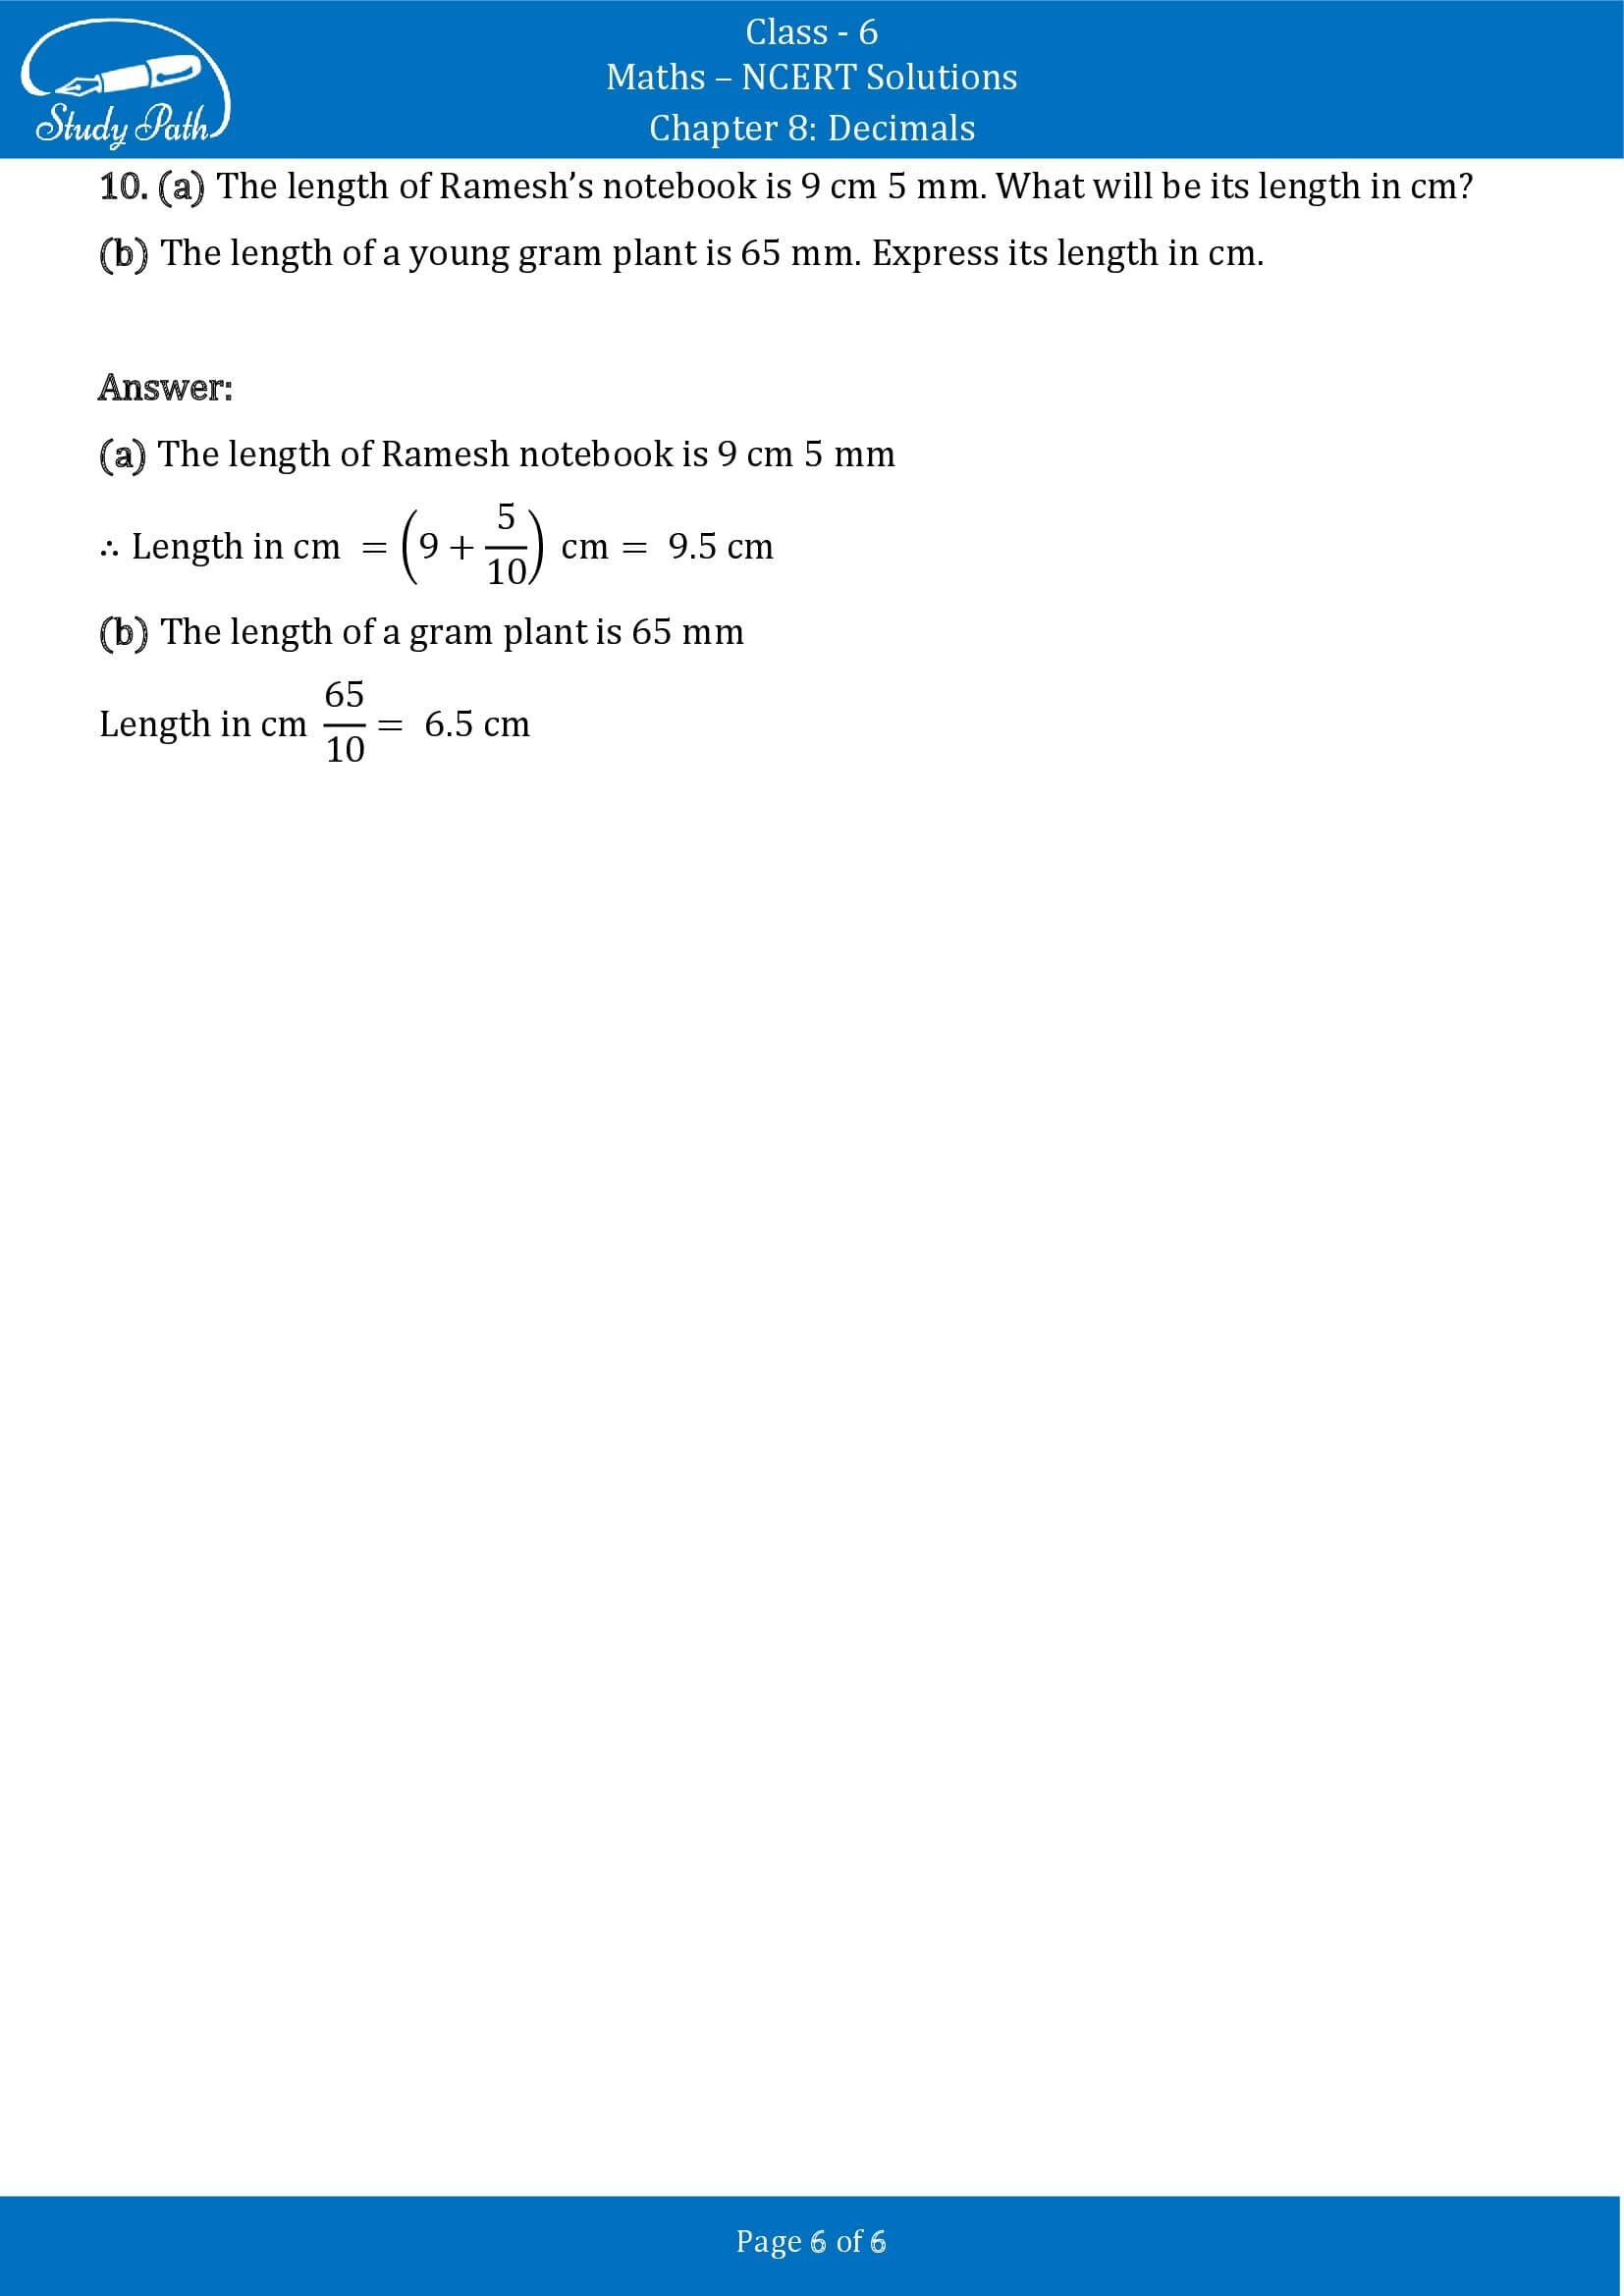 NCERT Solutions for Class 6 Maths Chapter 8 Decimals Exercise 8.1 00006